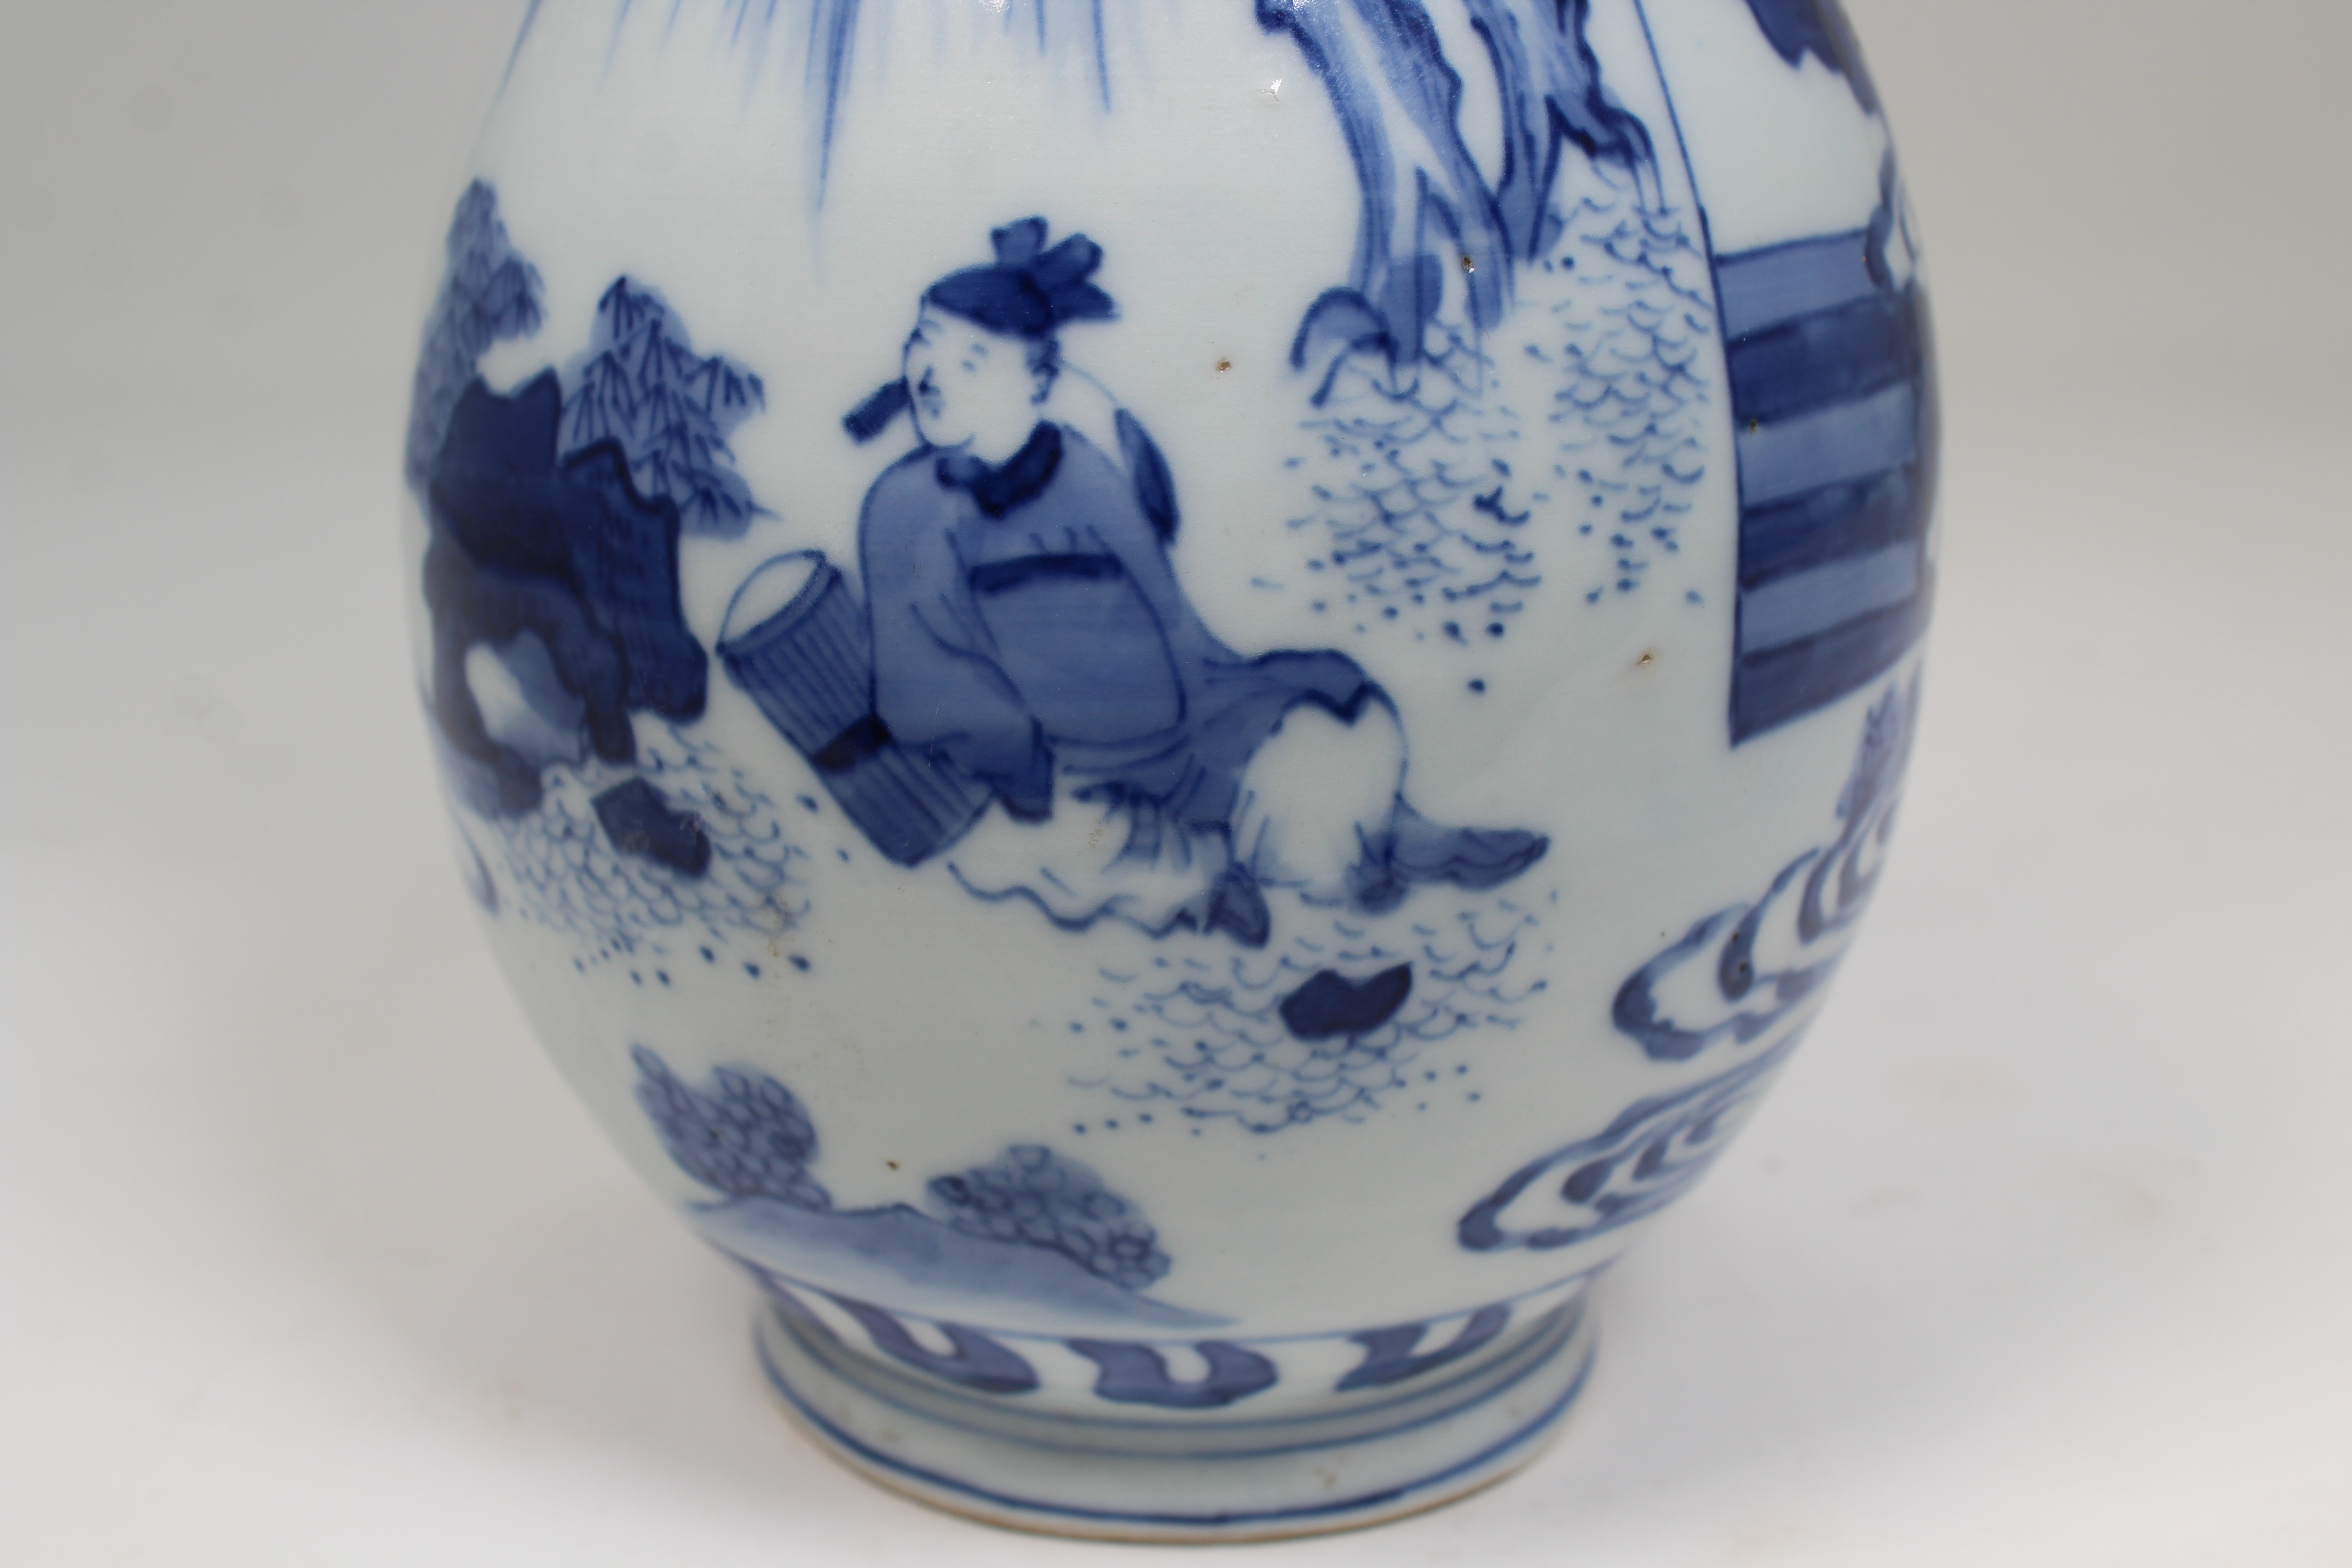 Chinese Blue/White Porcelain Vase. Scene depicts figures conversing. Size: 9 x 4.75 in. - Image 5 of 8